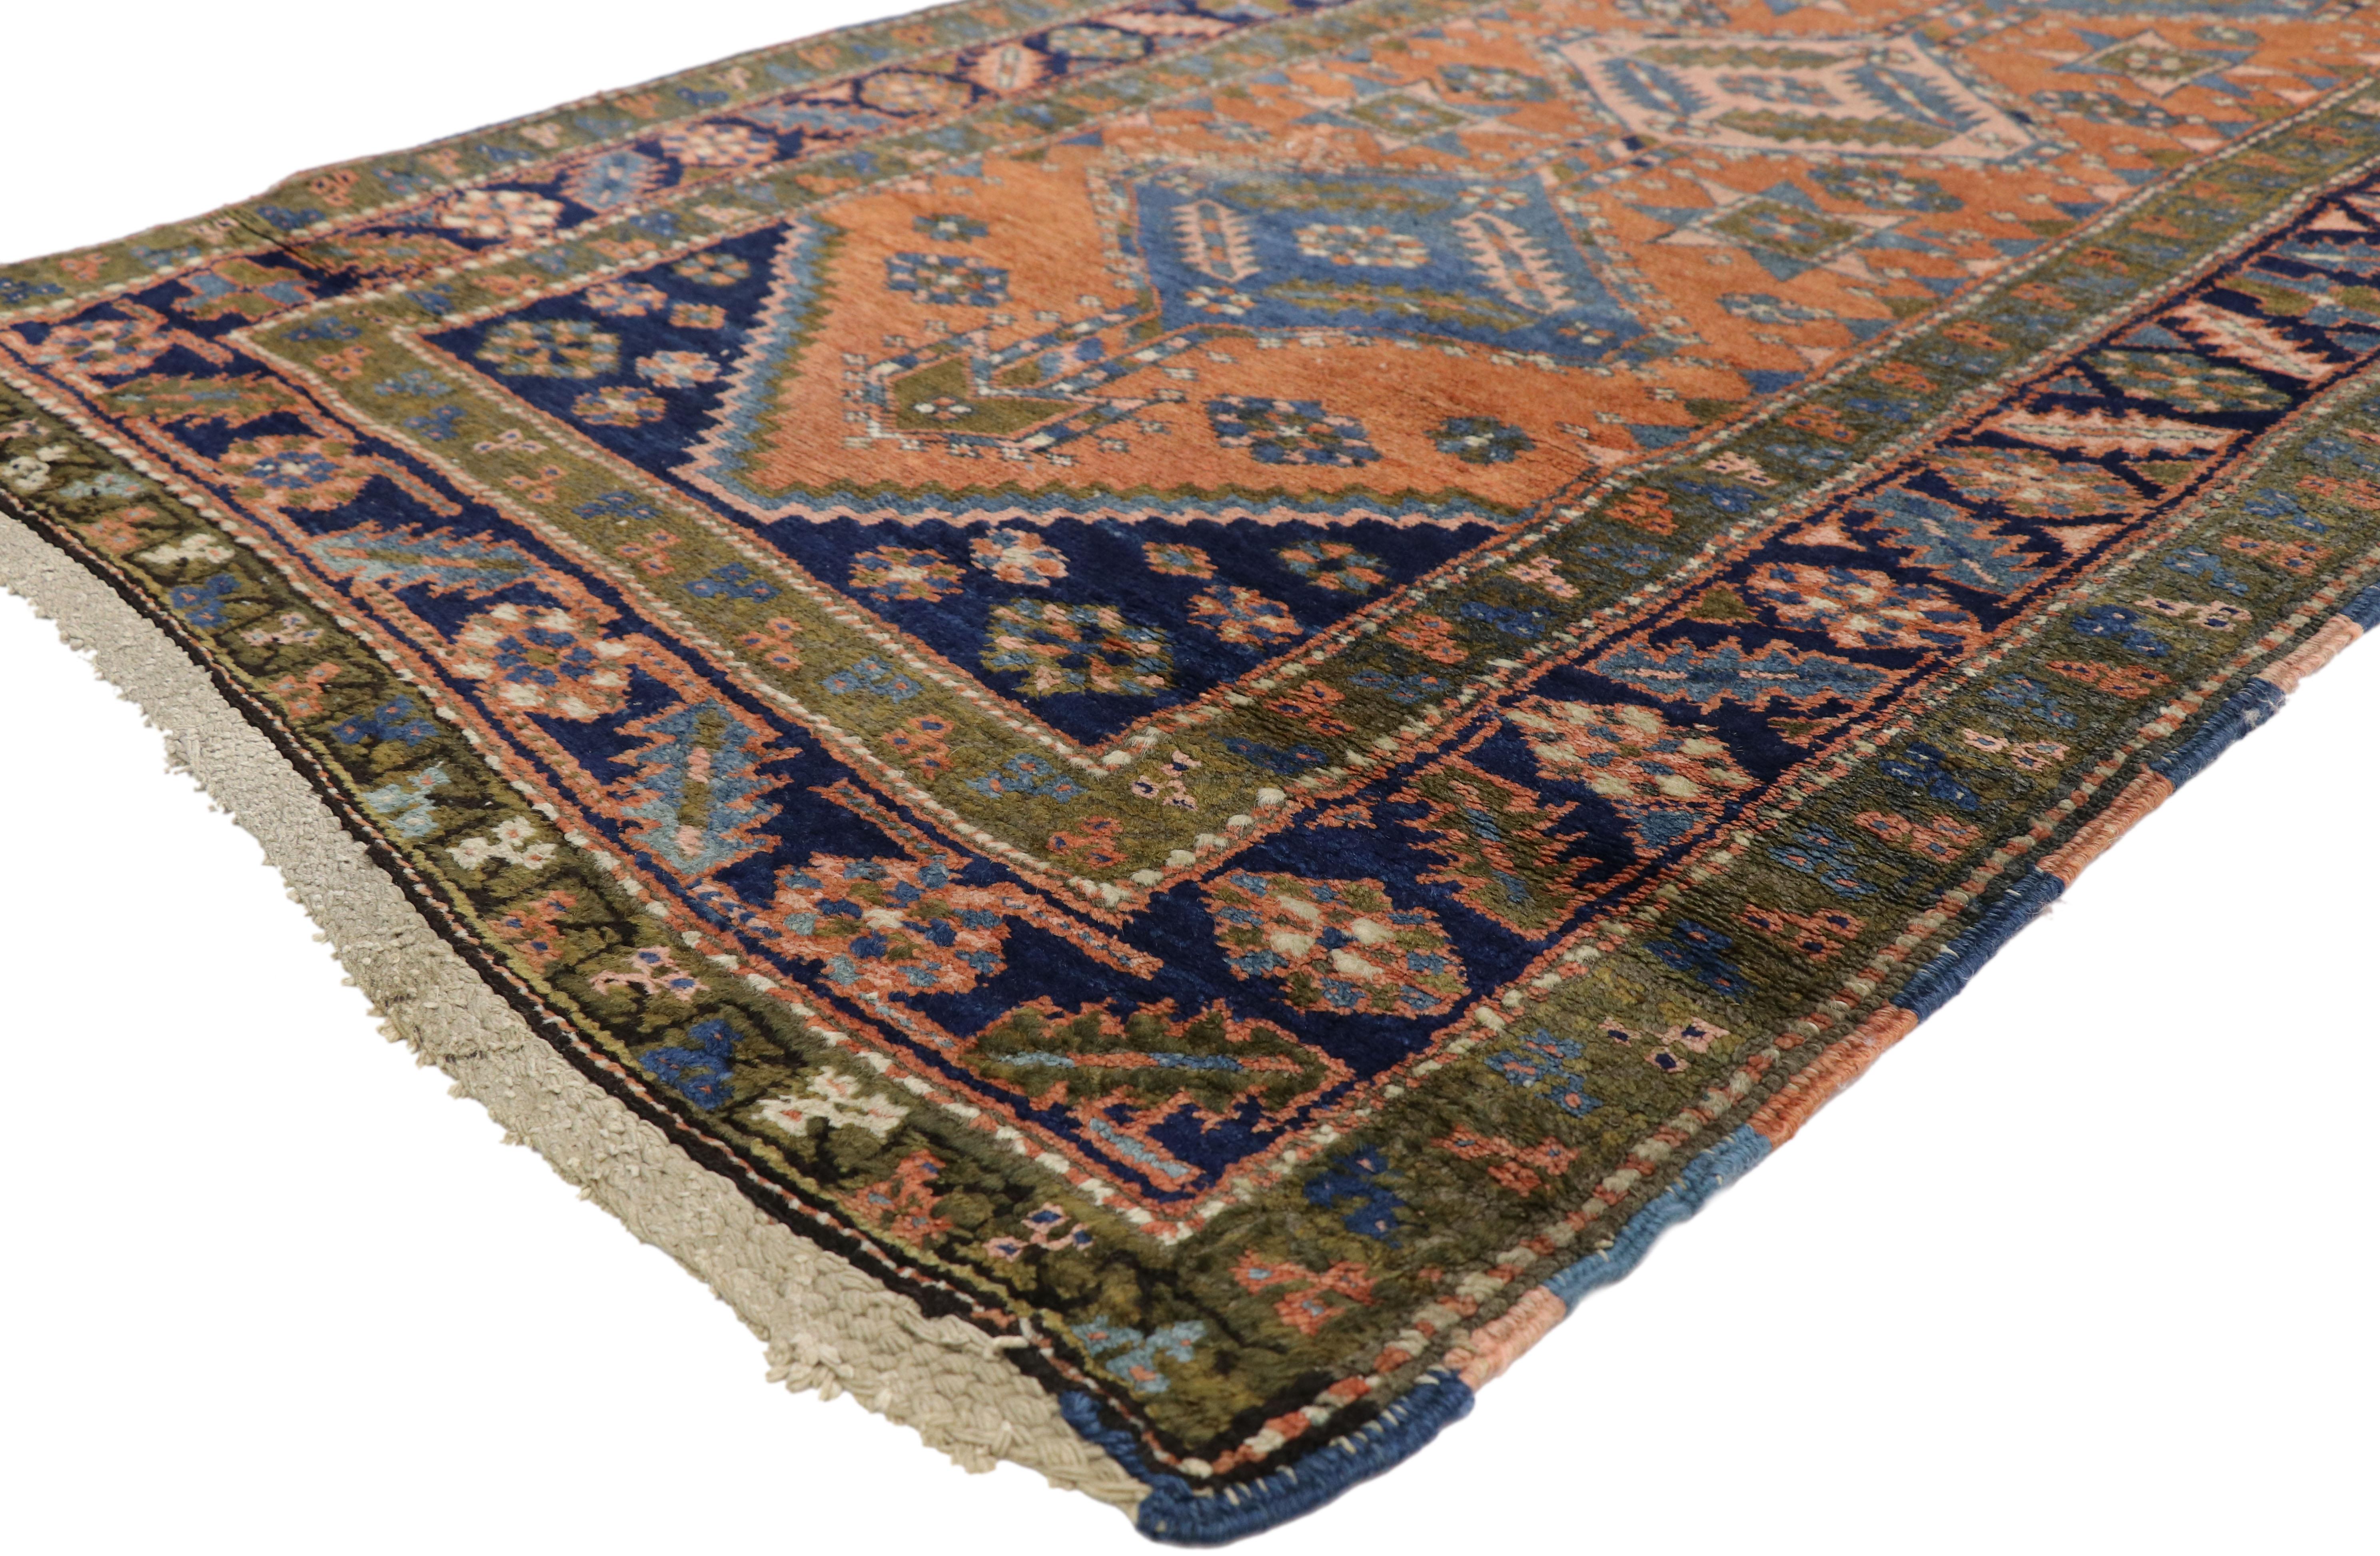 Antique hand-knotted wool Persian Heriz runner featuring alternating medallions with an all-over geometric design on an orange field. Surrounded by a blue border with serrated tribal motifs. Highlighting rectilinear architectural elements and Art